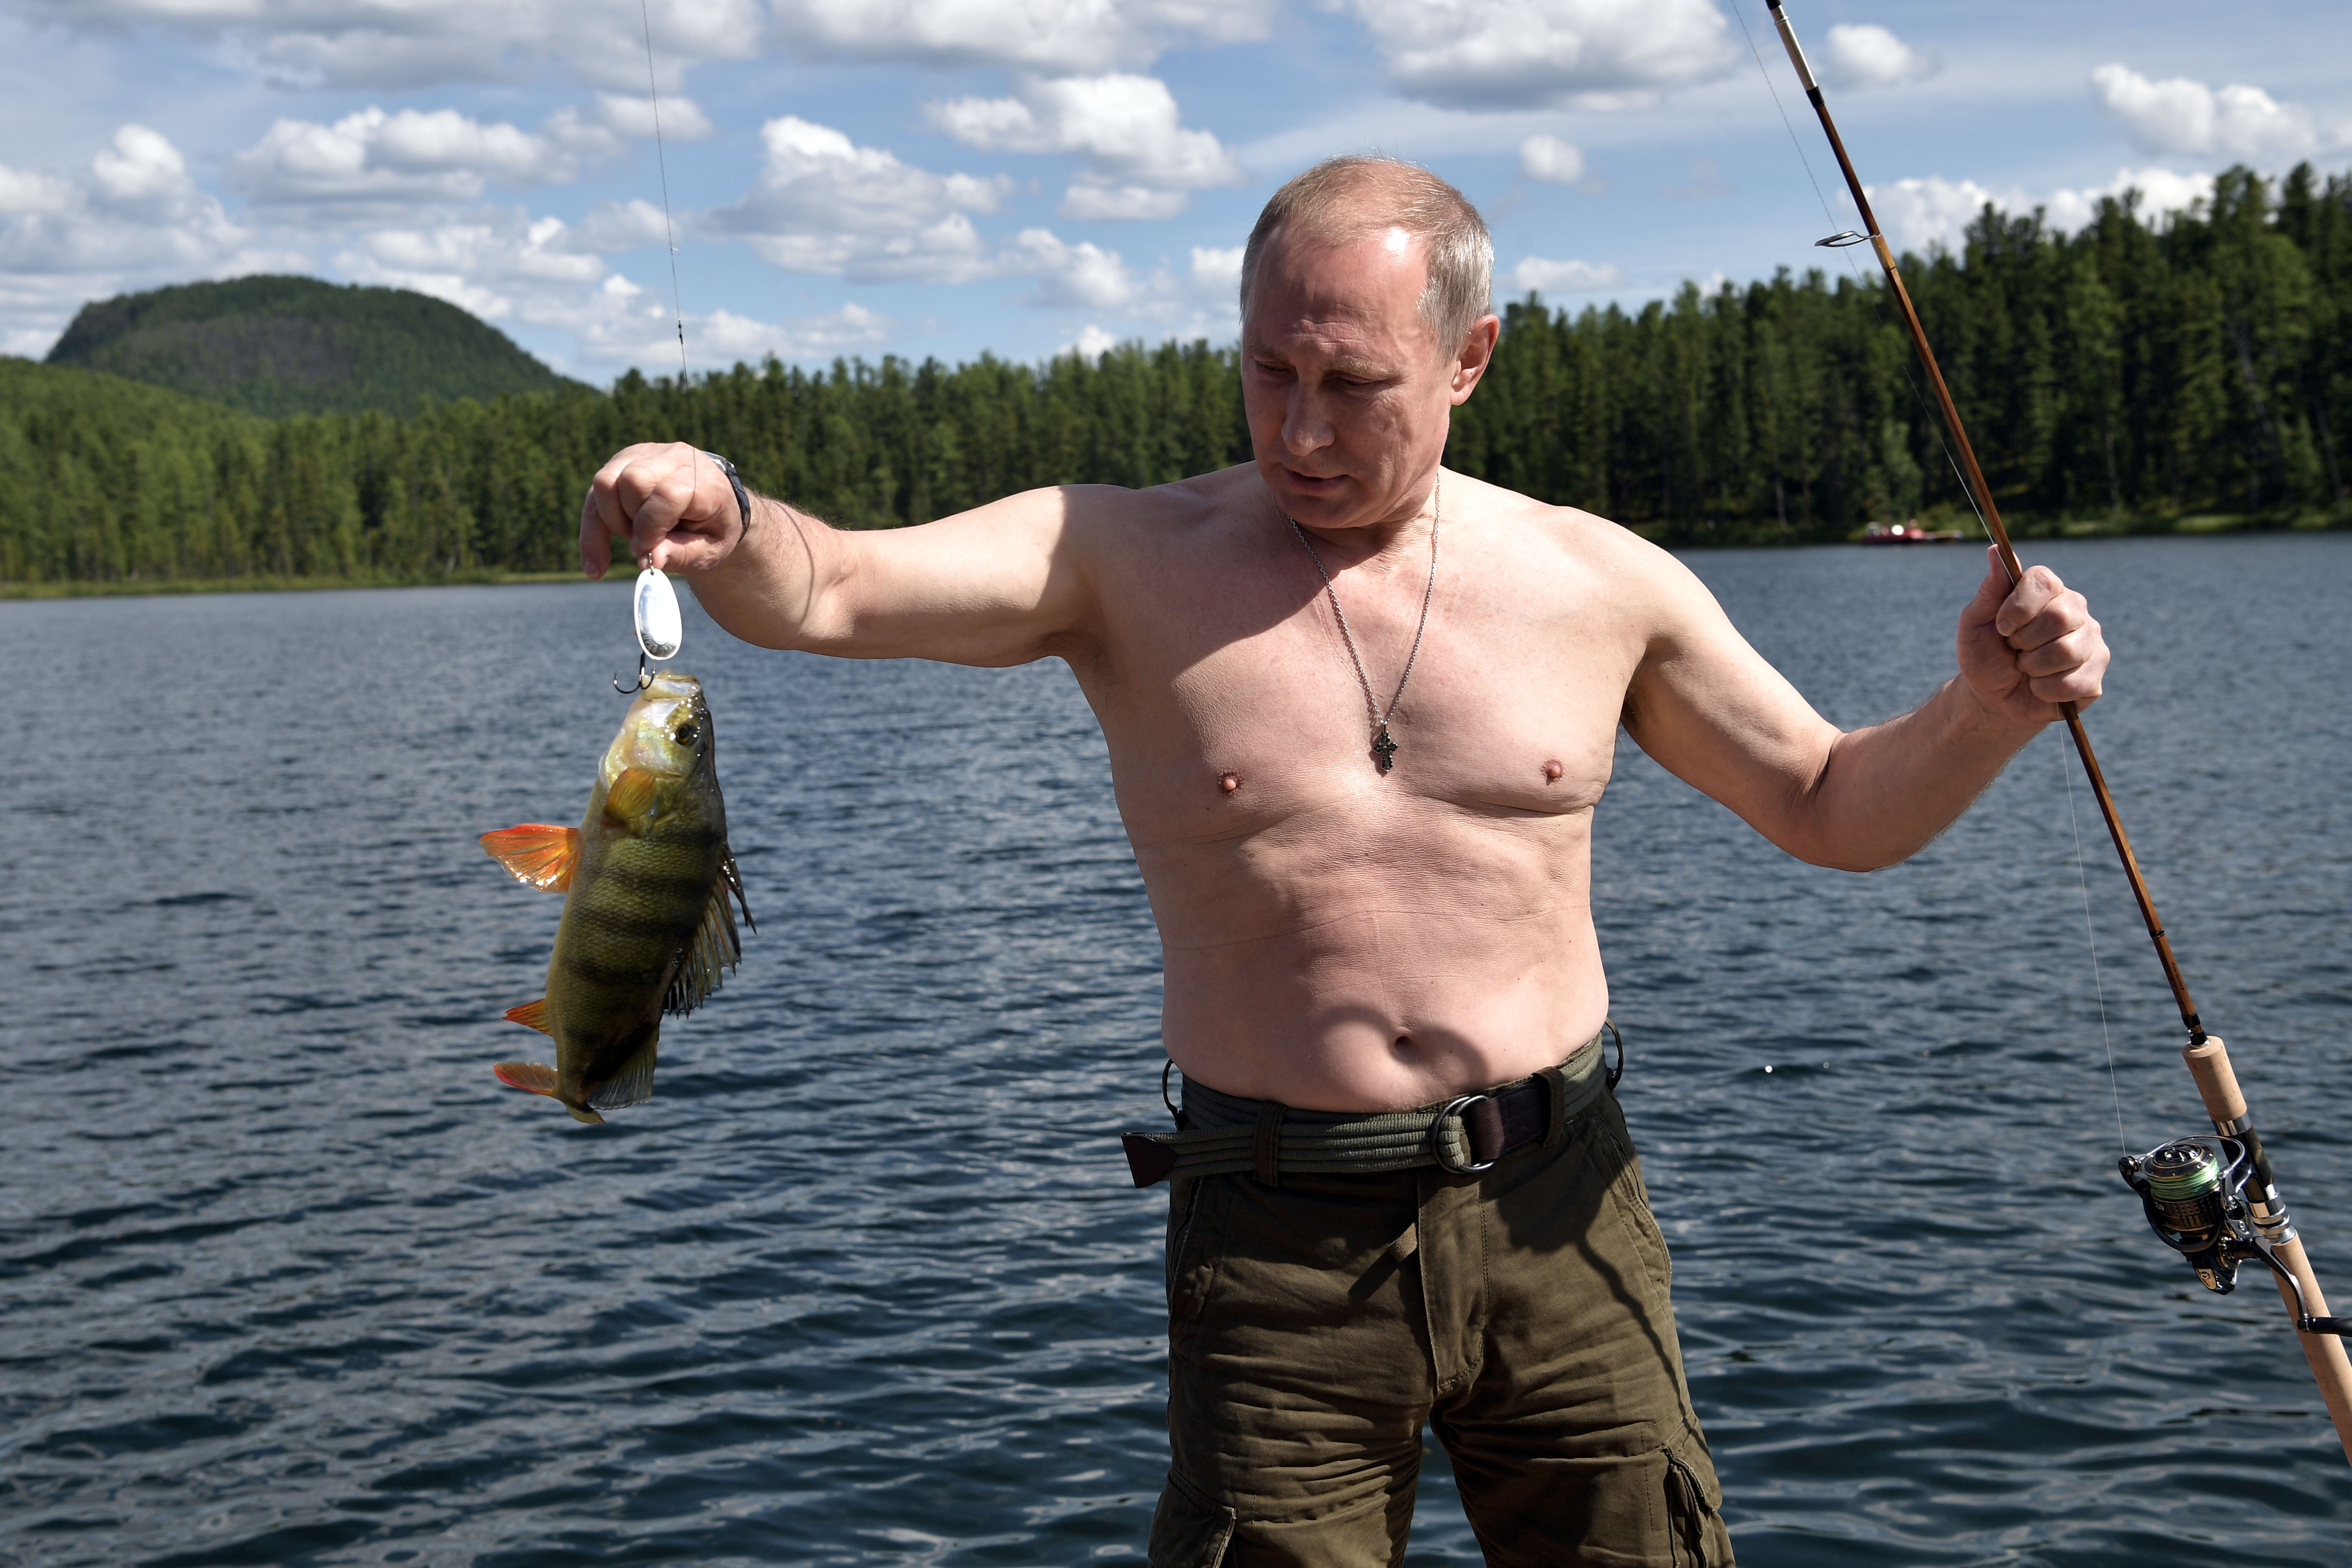 Russian President Vladimir Putin holds a fish he caught during the hunting and fishing trip which took place on August 1-3 in the republic of Tyva in southern Siberia